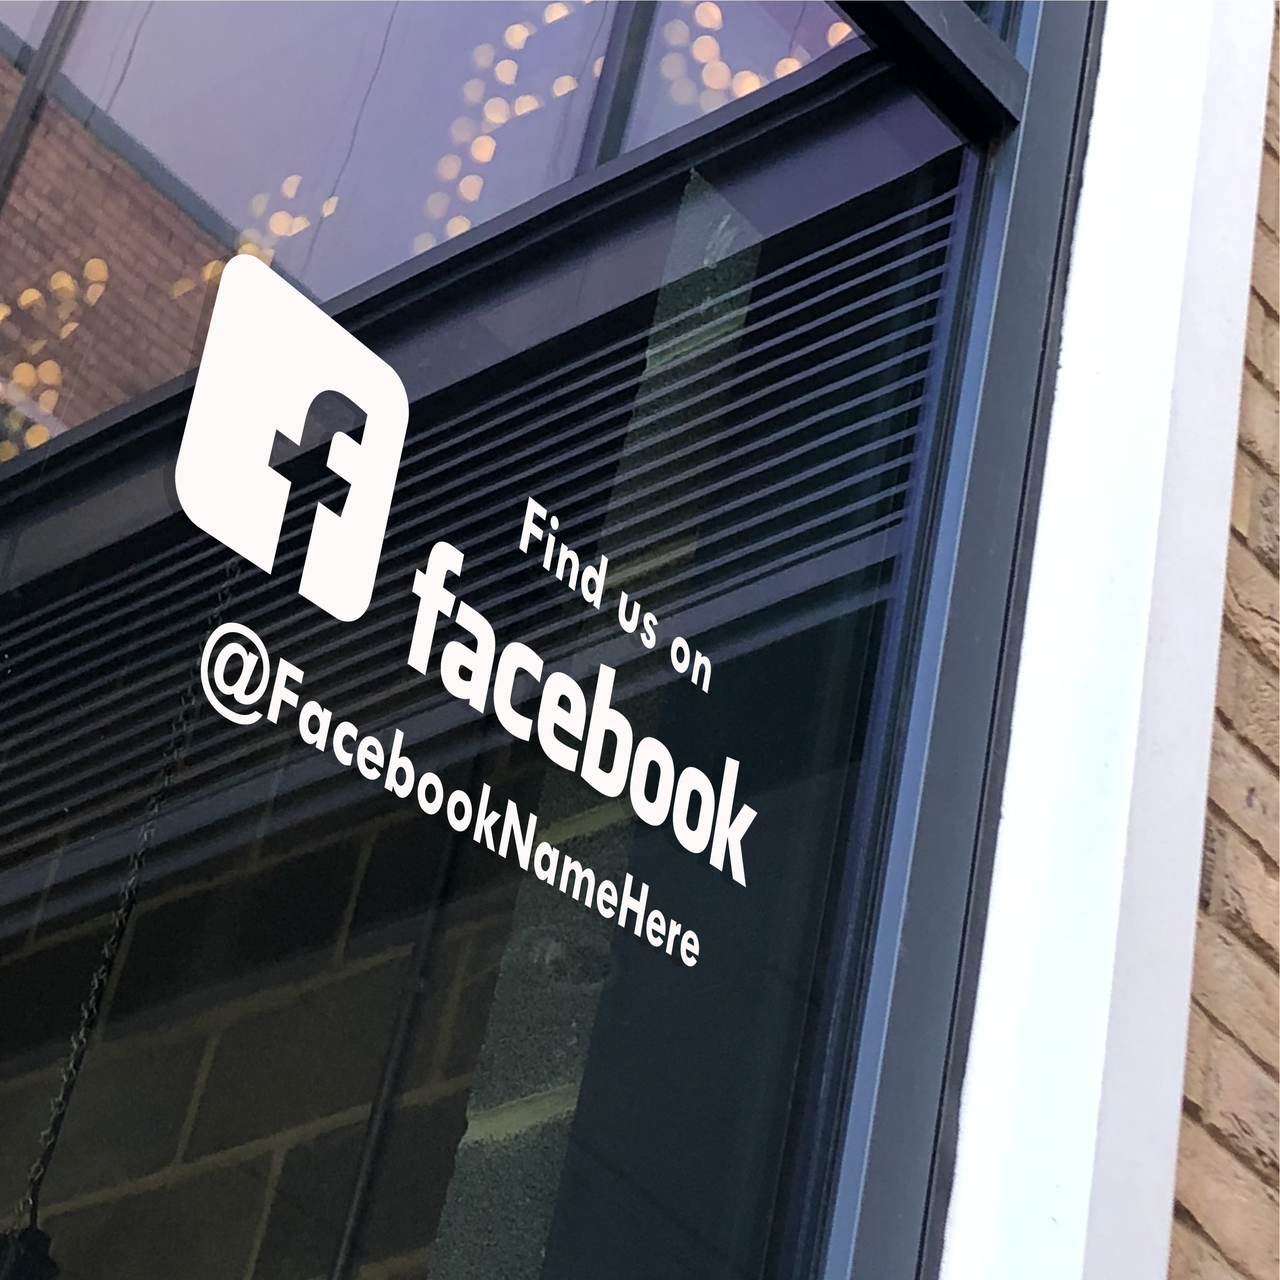 FIND US ON FACEBOOK - Social Media Window Decal (Type 1)